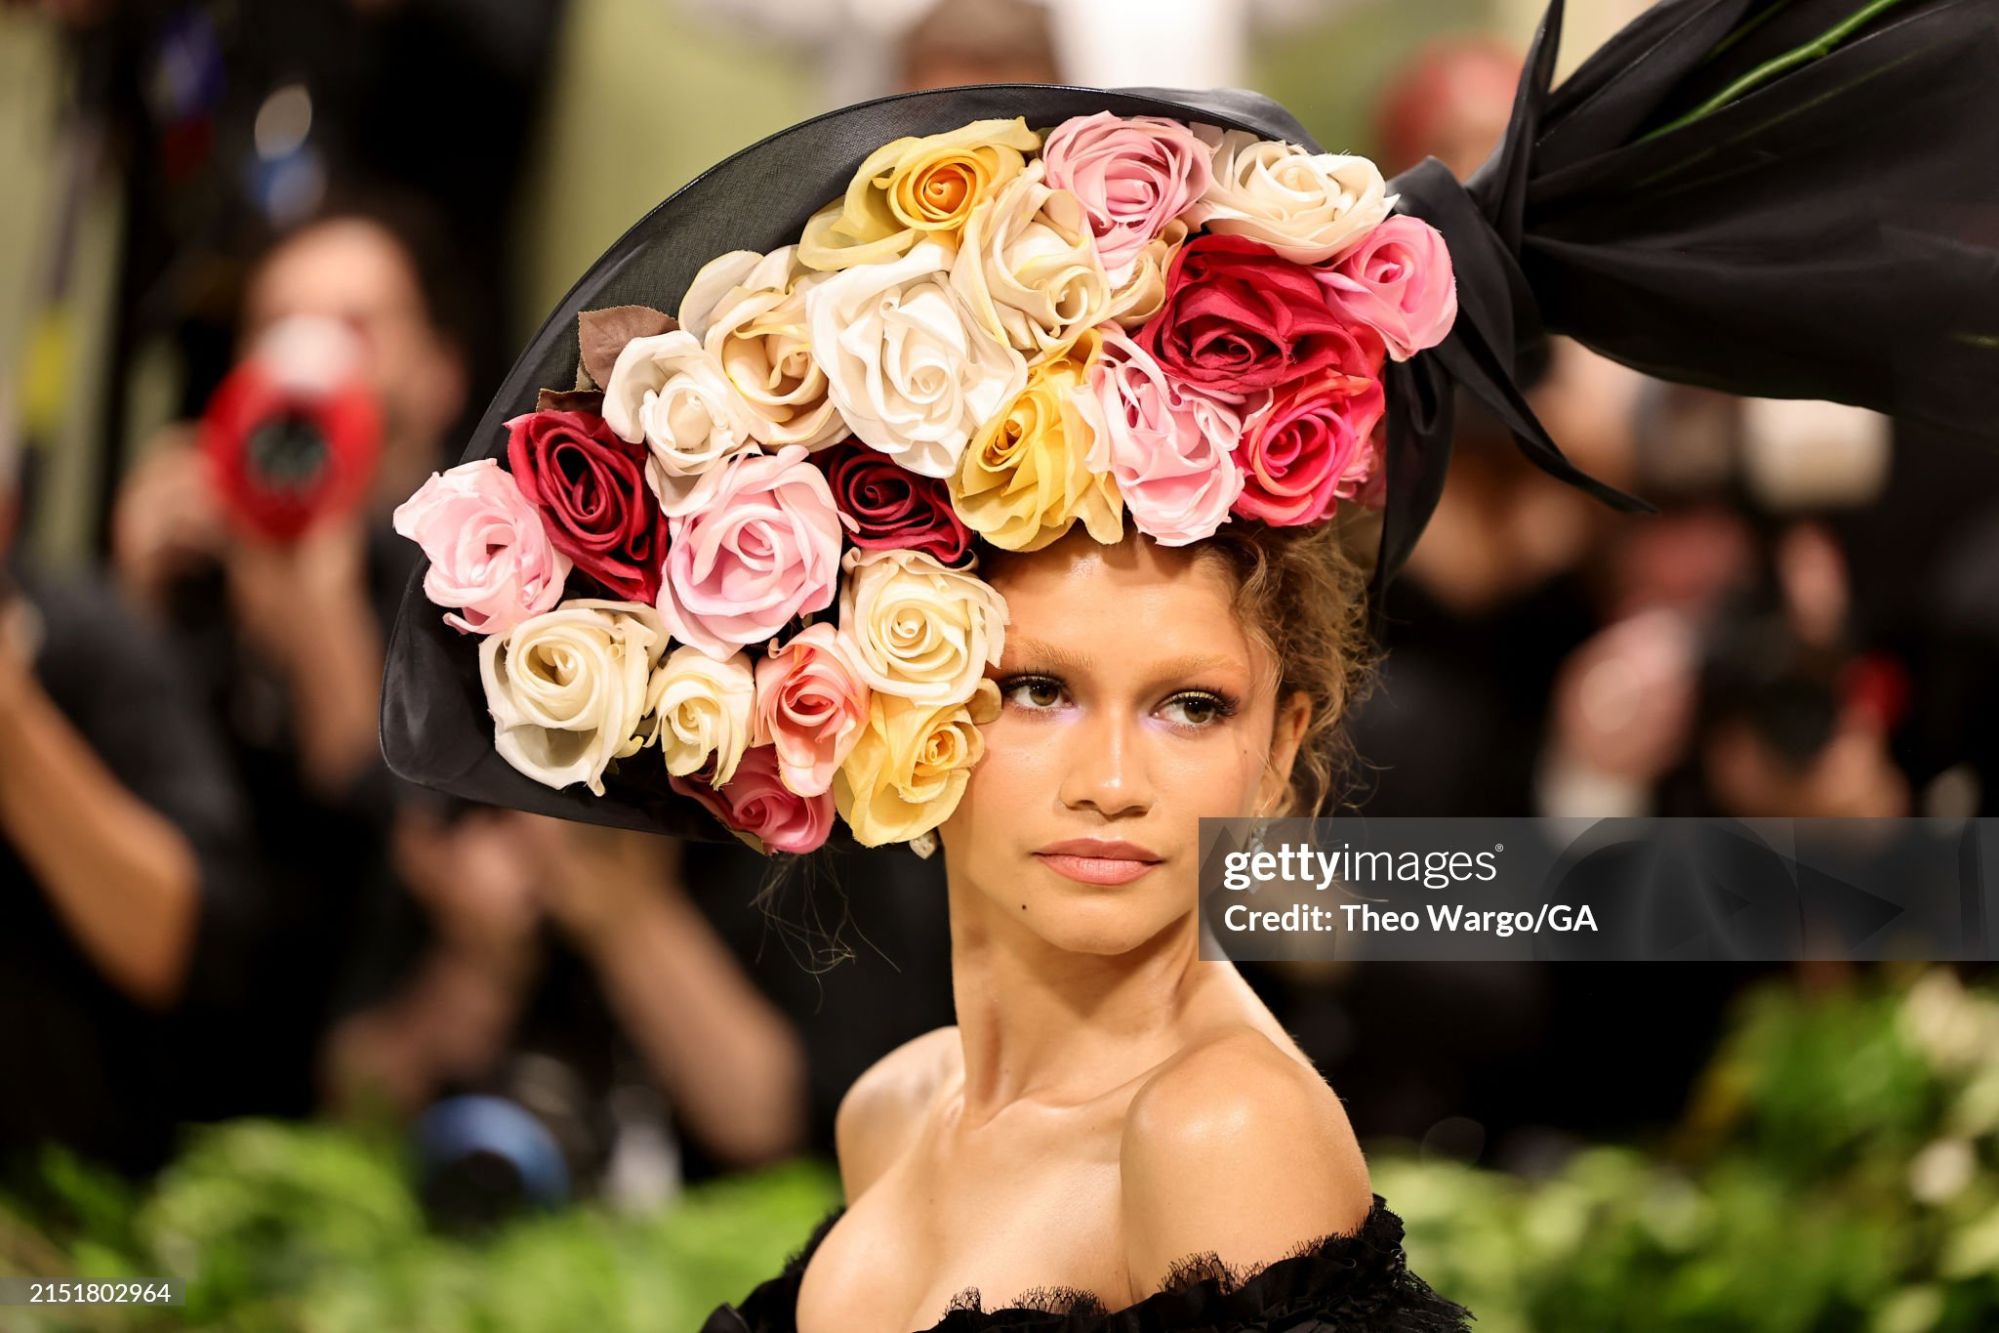 gettyimages-2151802964-2048x2048.jpg